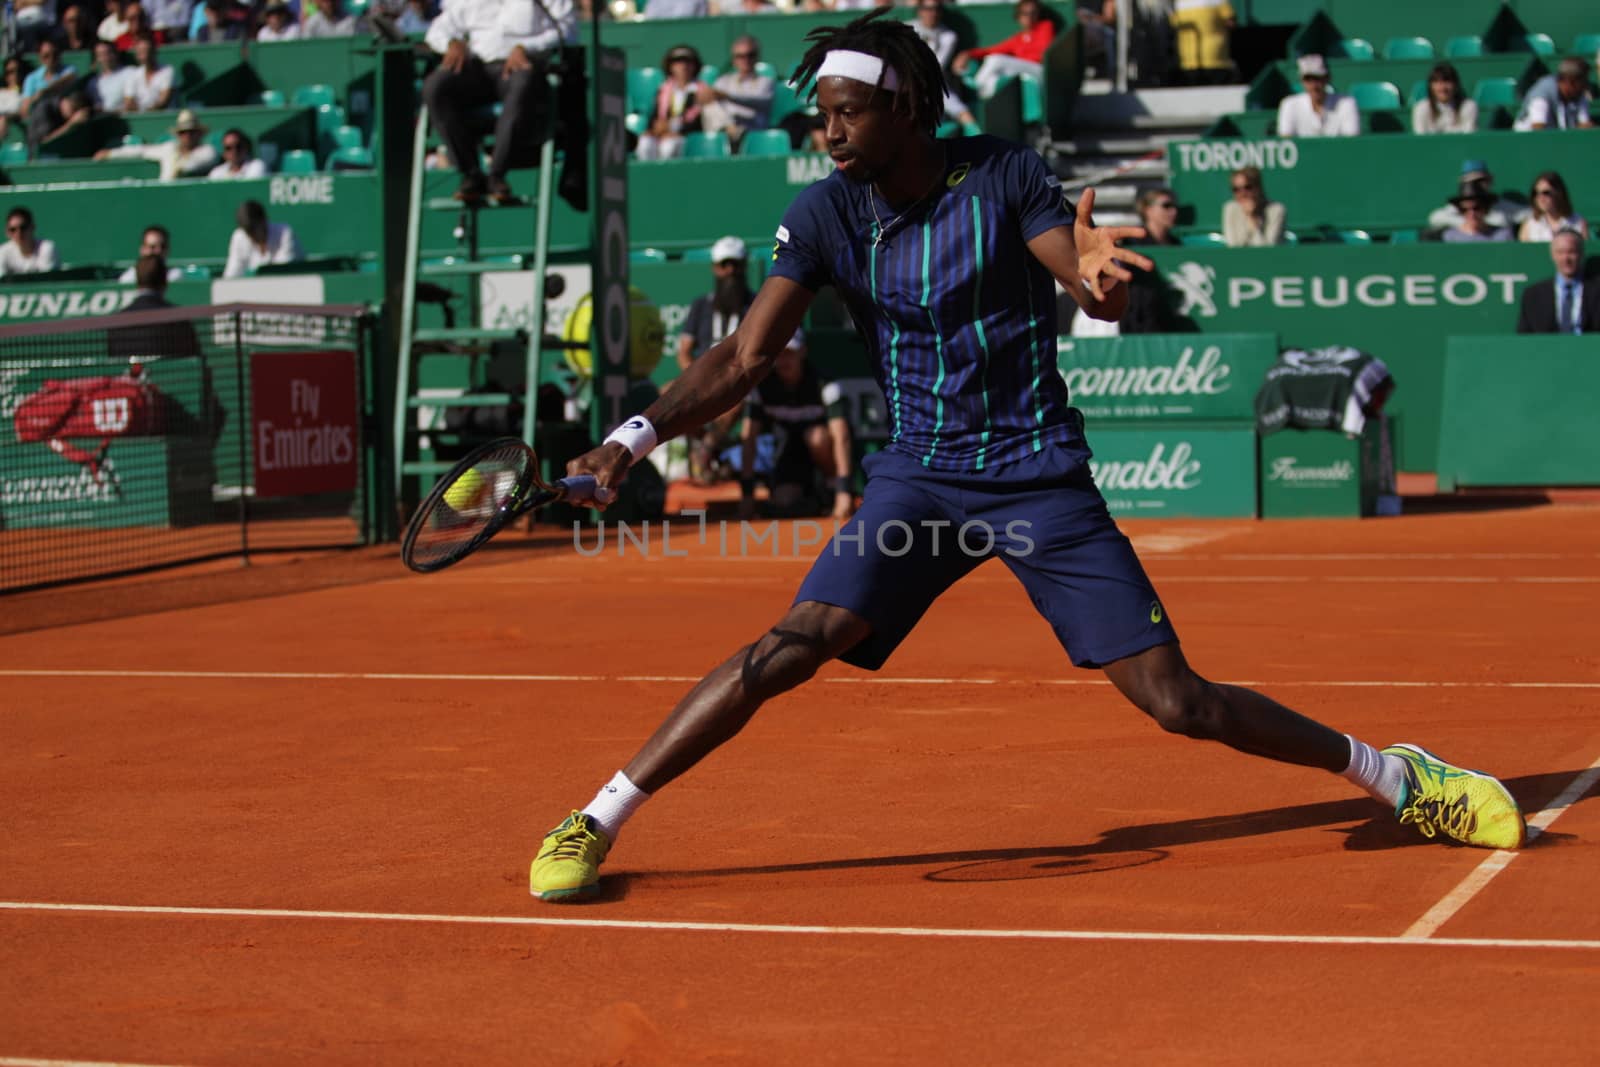 MONACO, Monte-Carlo : France's Gael Monfils hits a return to Spain's Marcel Granollers during the Monte-Carlo ATP Masters Series Tournament tennis match, on April 15, 2016 in Monaco. 